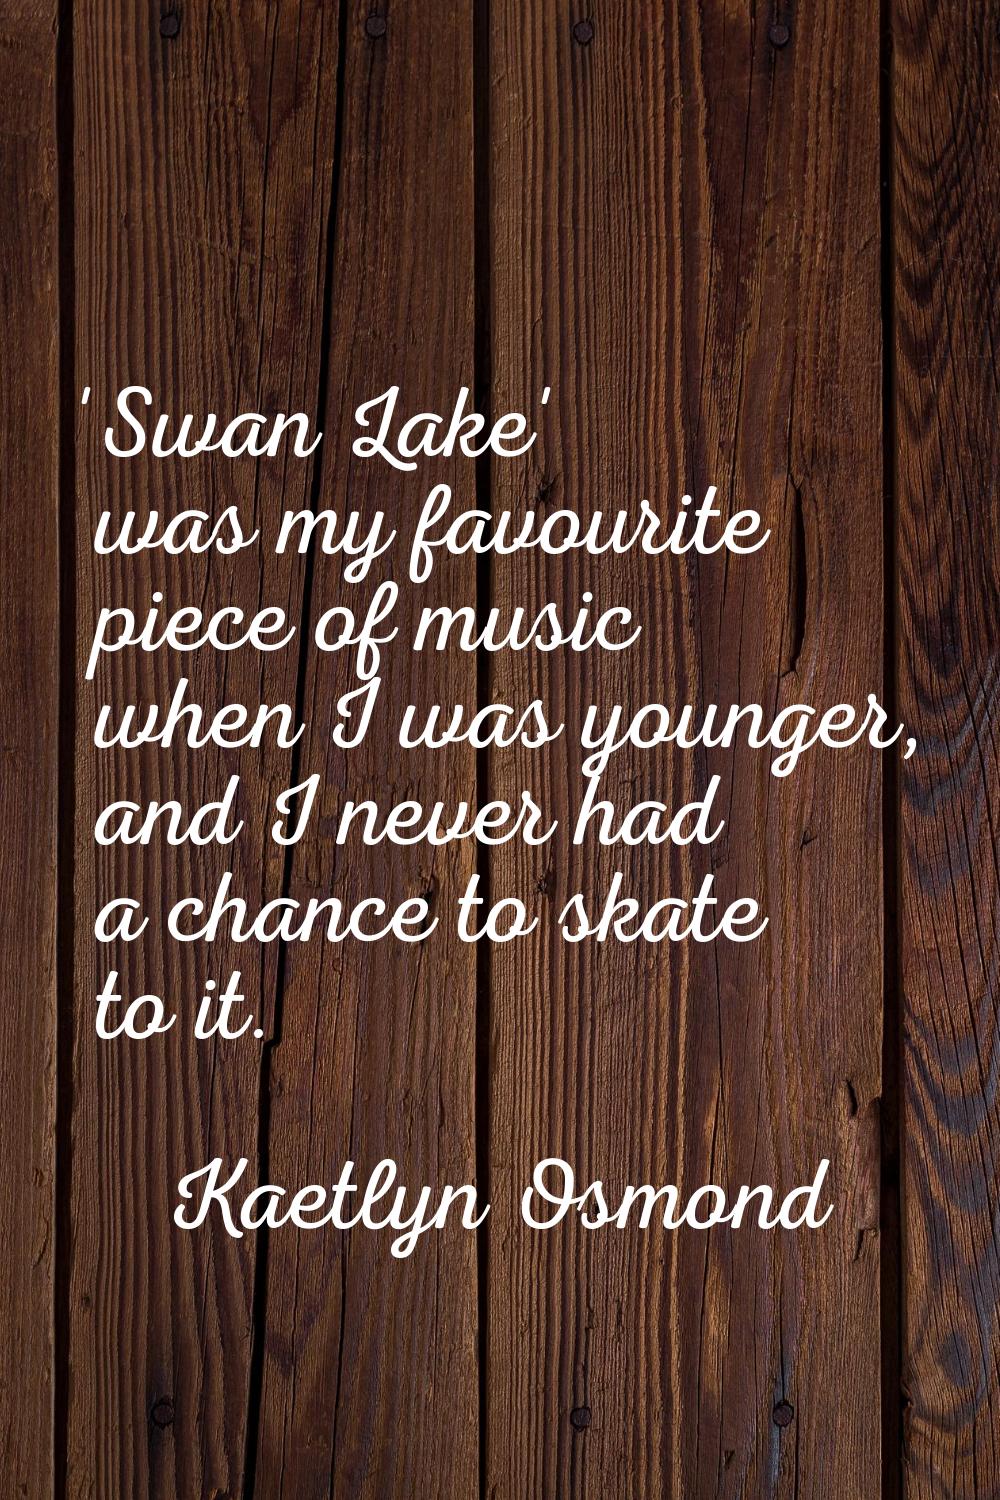 'Swan Lake' was my favourite piece of music when I was younger, and I never had a chance to skate t